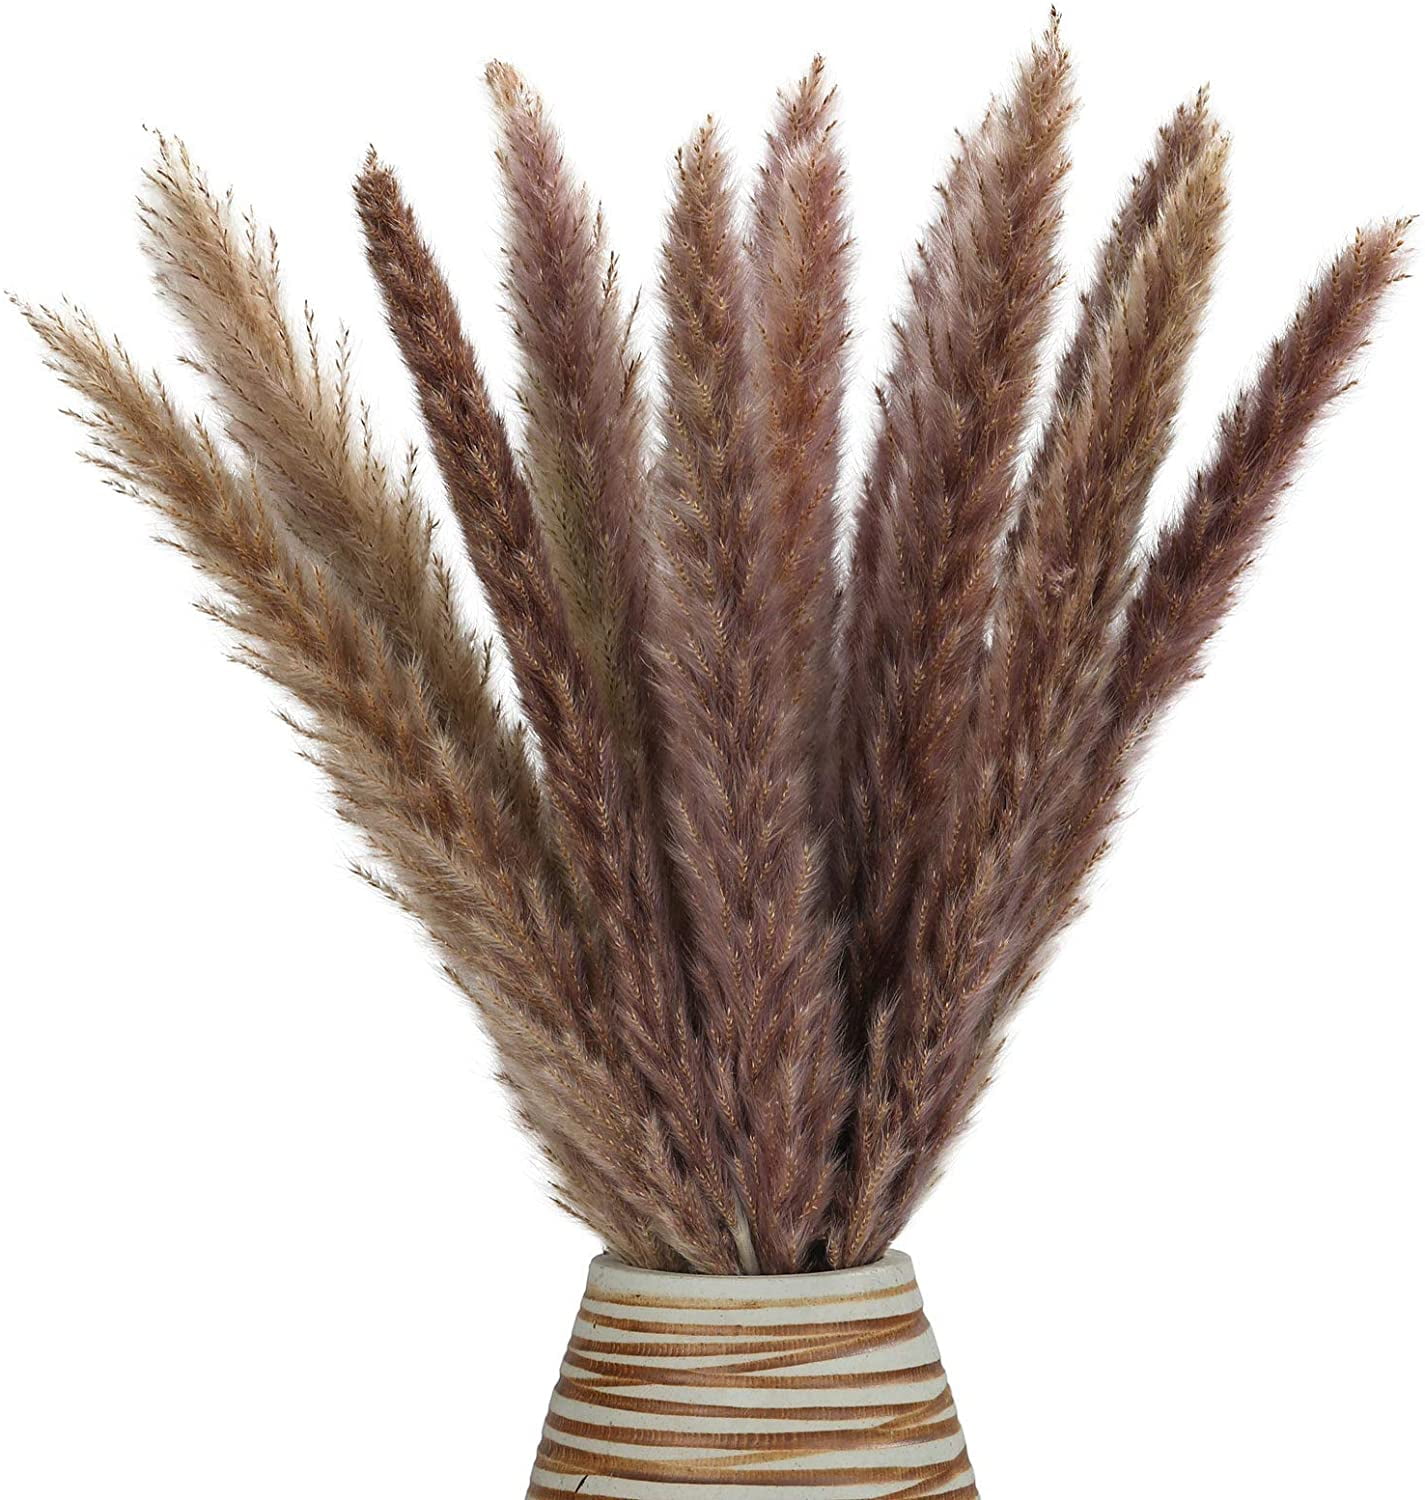 Details about   15-120PC Natural Dried Pampas Grass Reed Flower Bunch Home Wedding Bouquet Decor